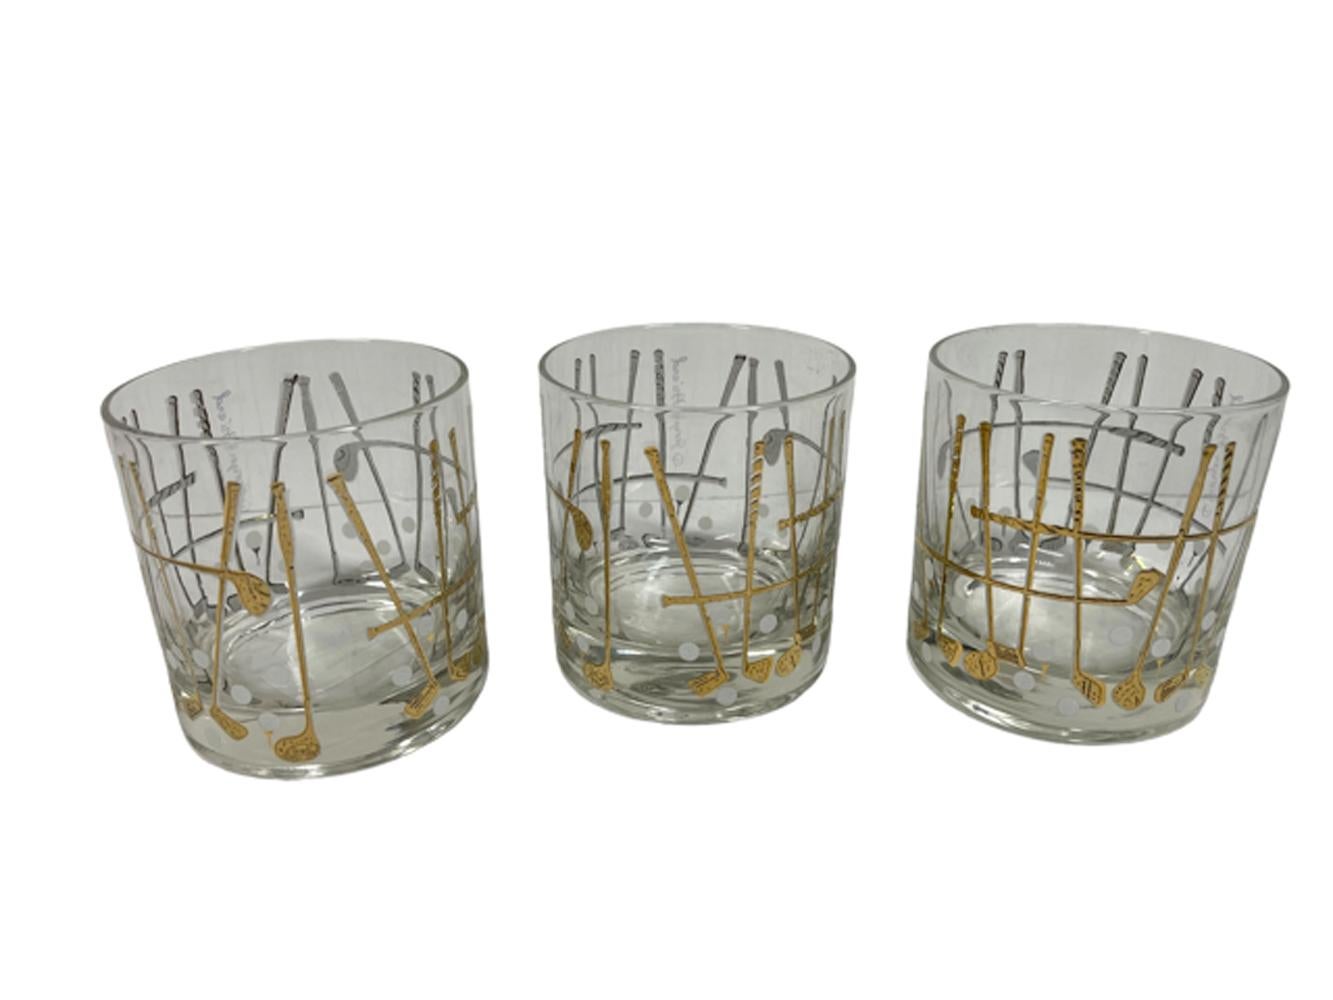 Six Georges Briard Designed Rocks Glasses in the 